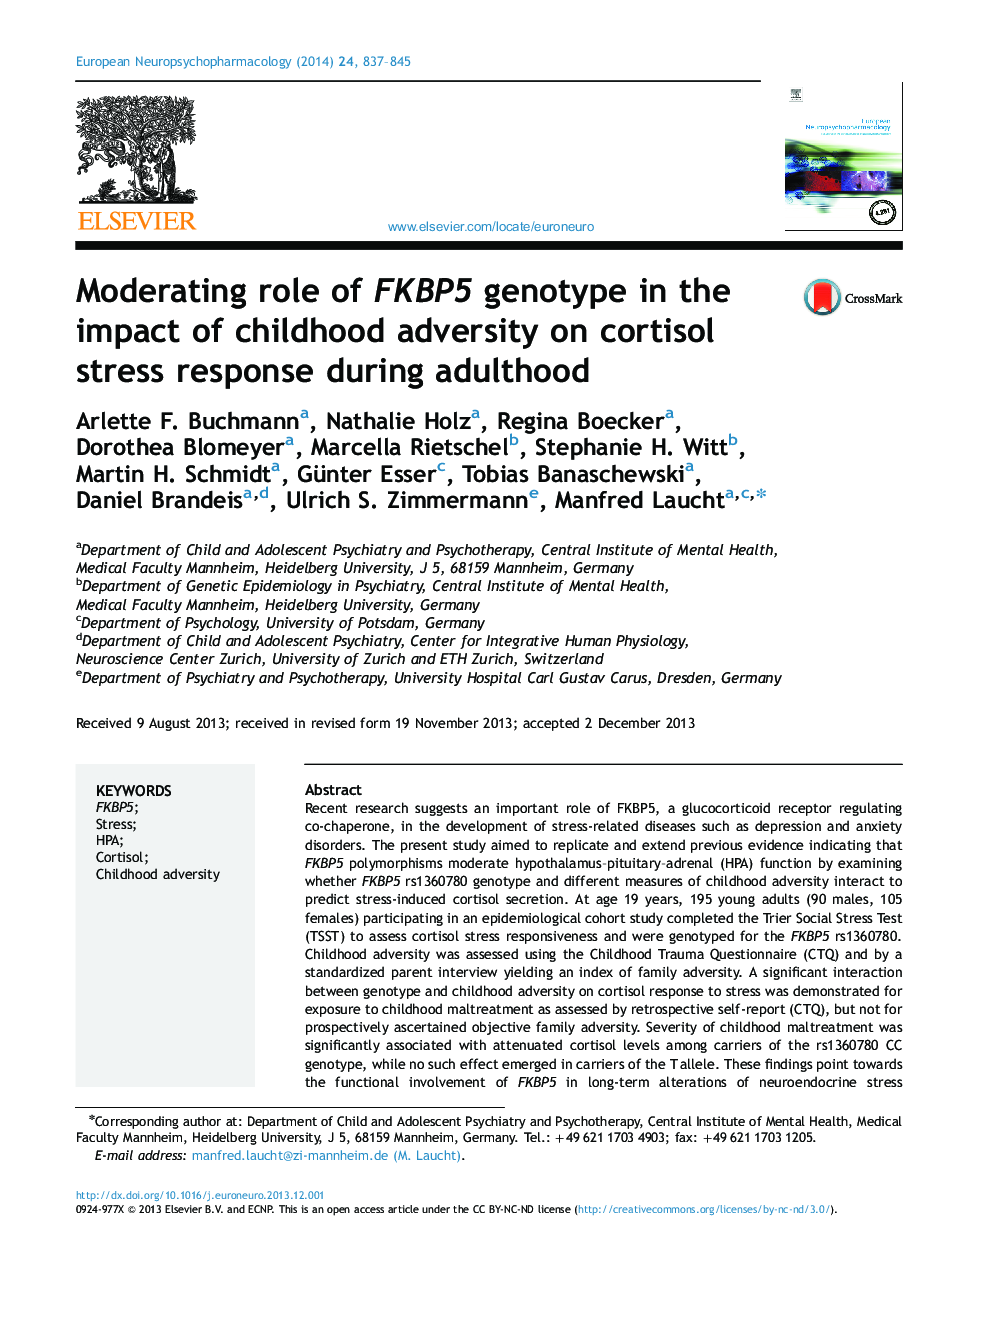 Moderating role of FKBP5 genotype in the impact of childhood adversity on cortisol stress response during adulthood